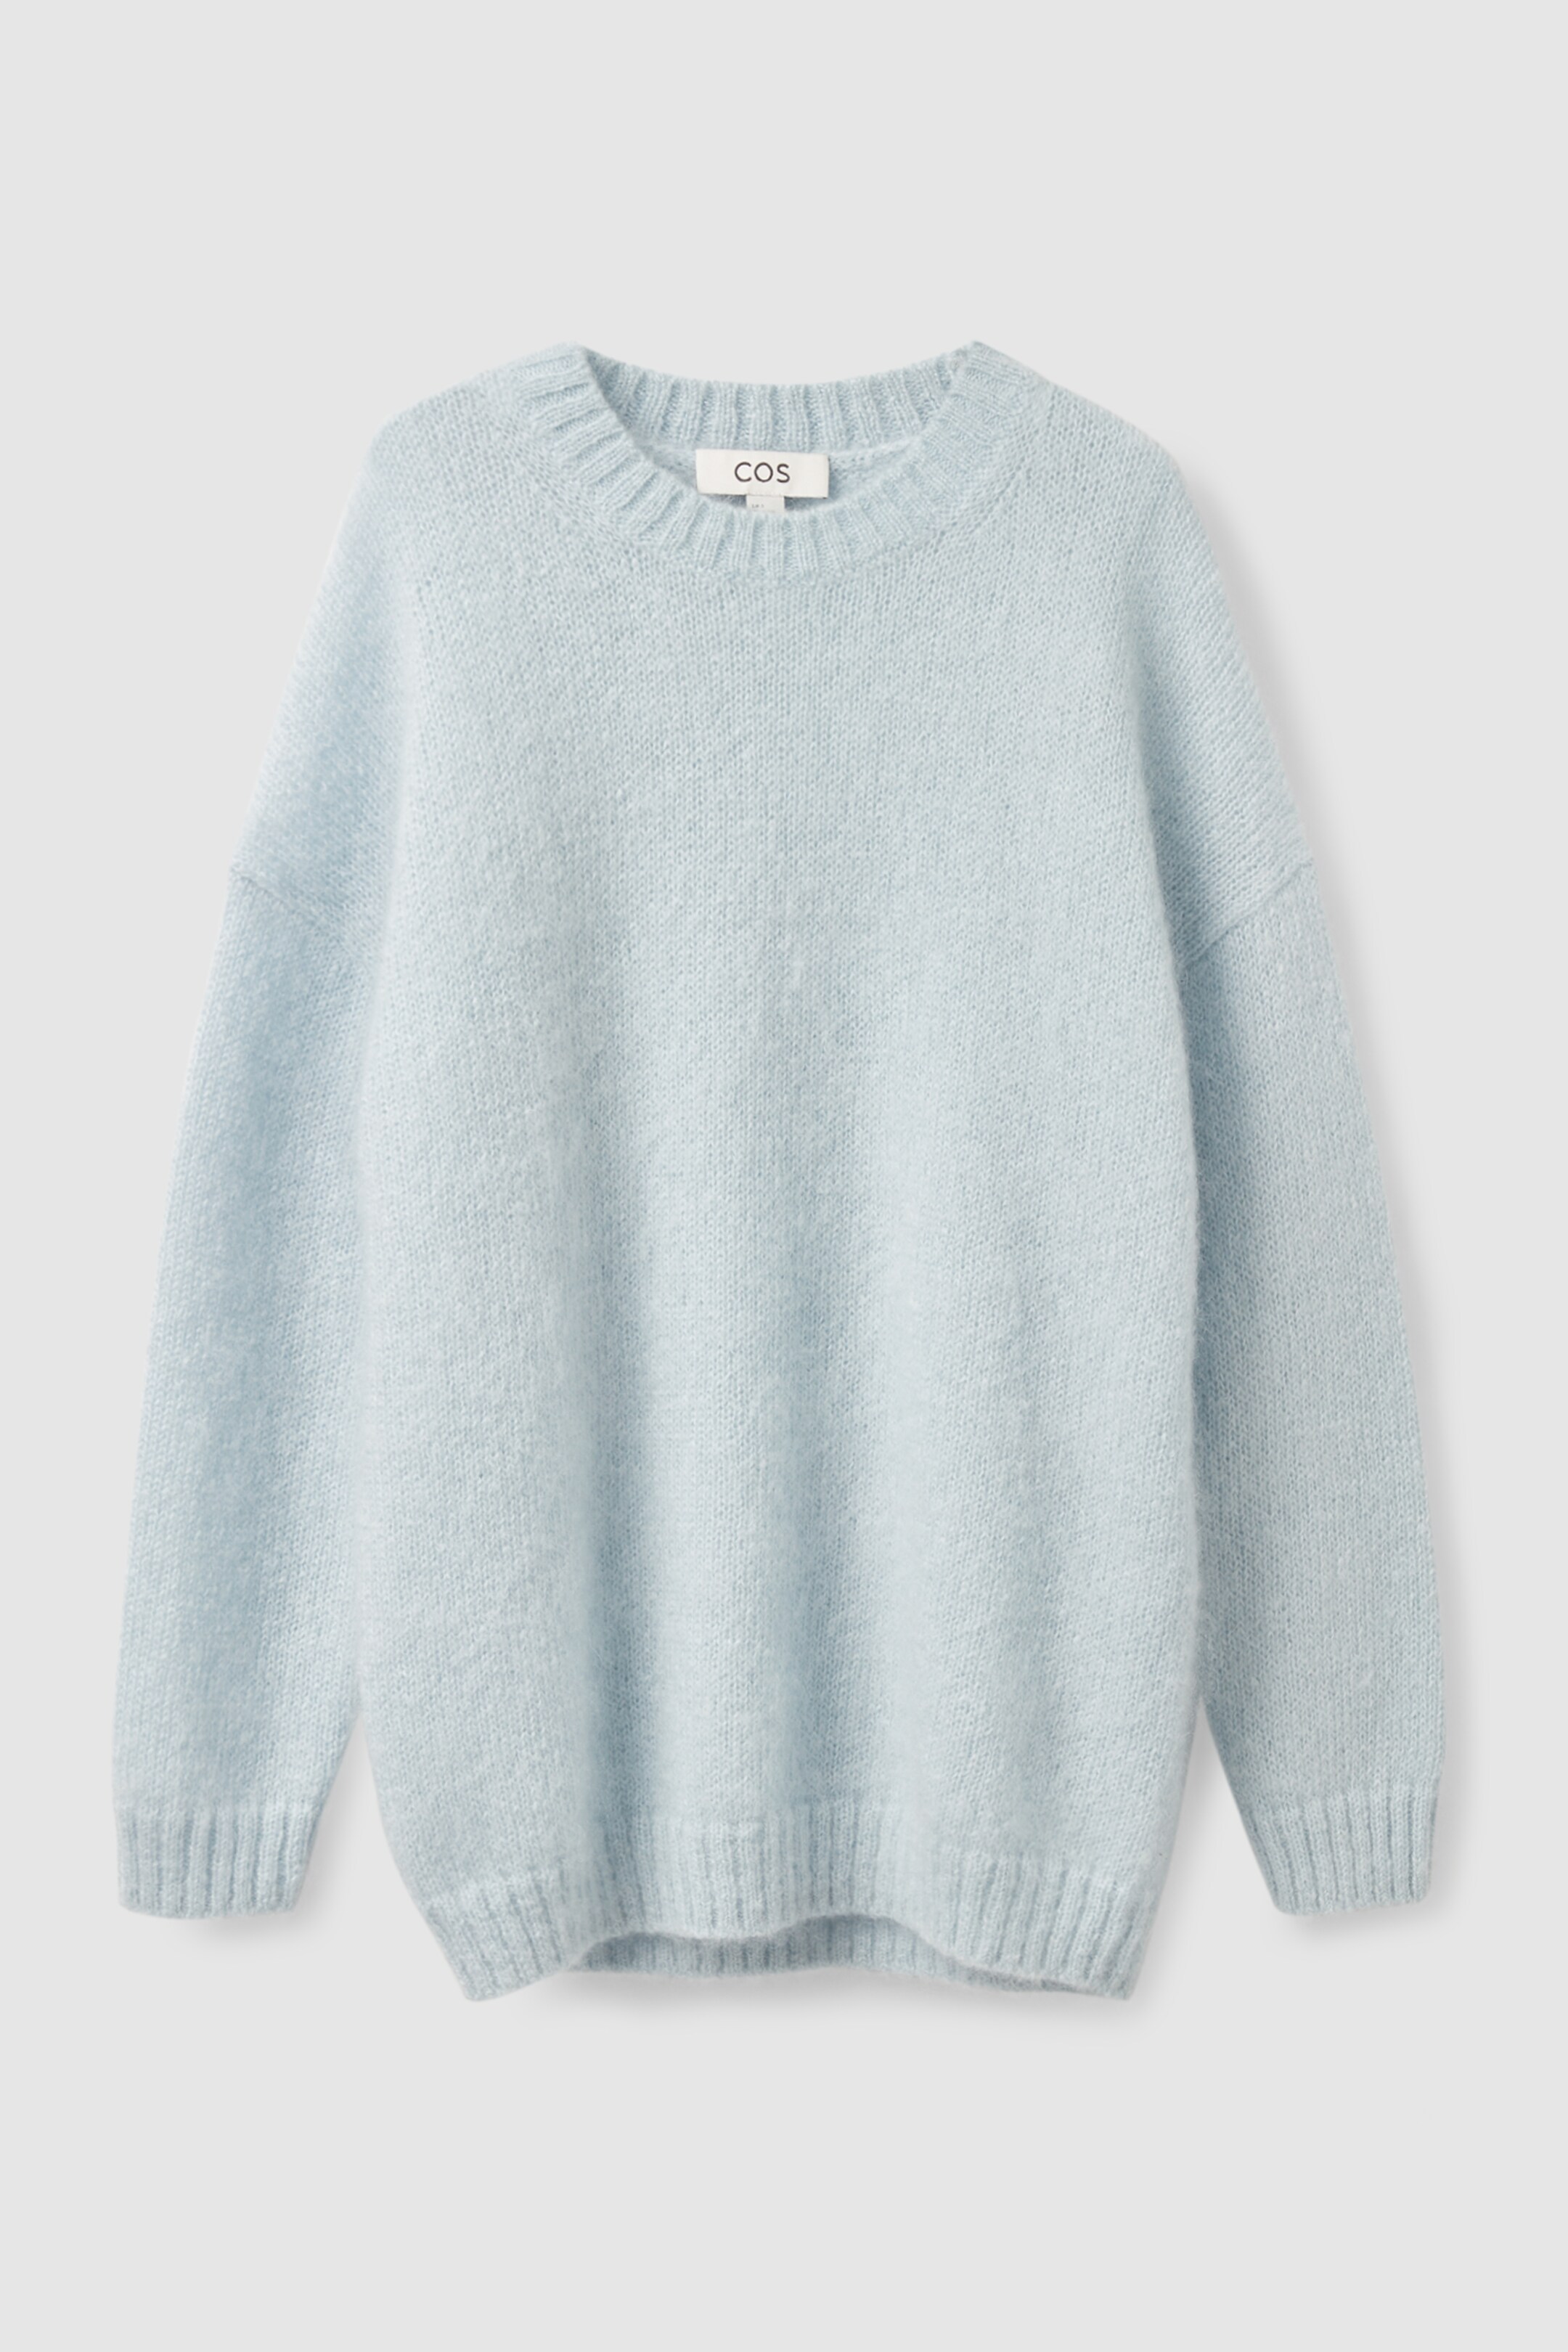 Front image of cos MOHAIR-BLEND OVERSIZED JUMPER in LIGHT BLUE